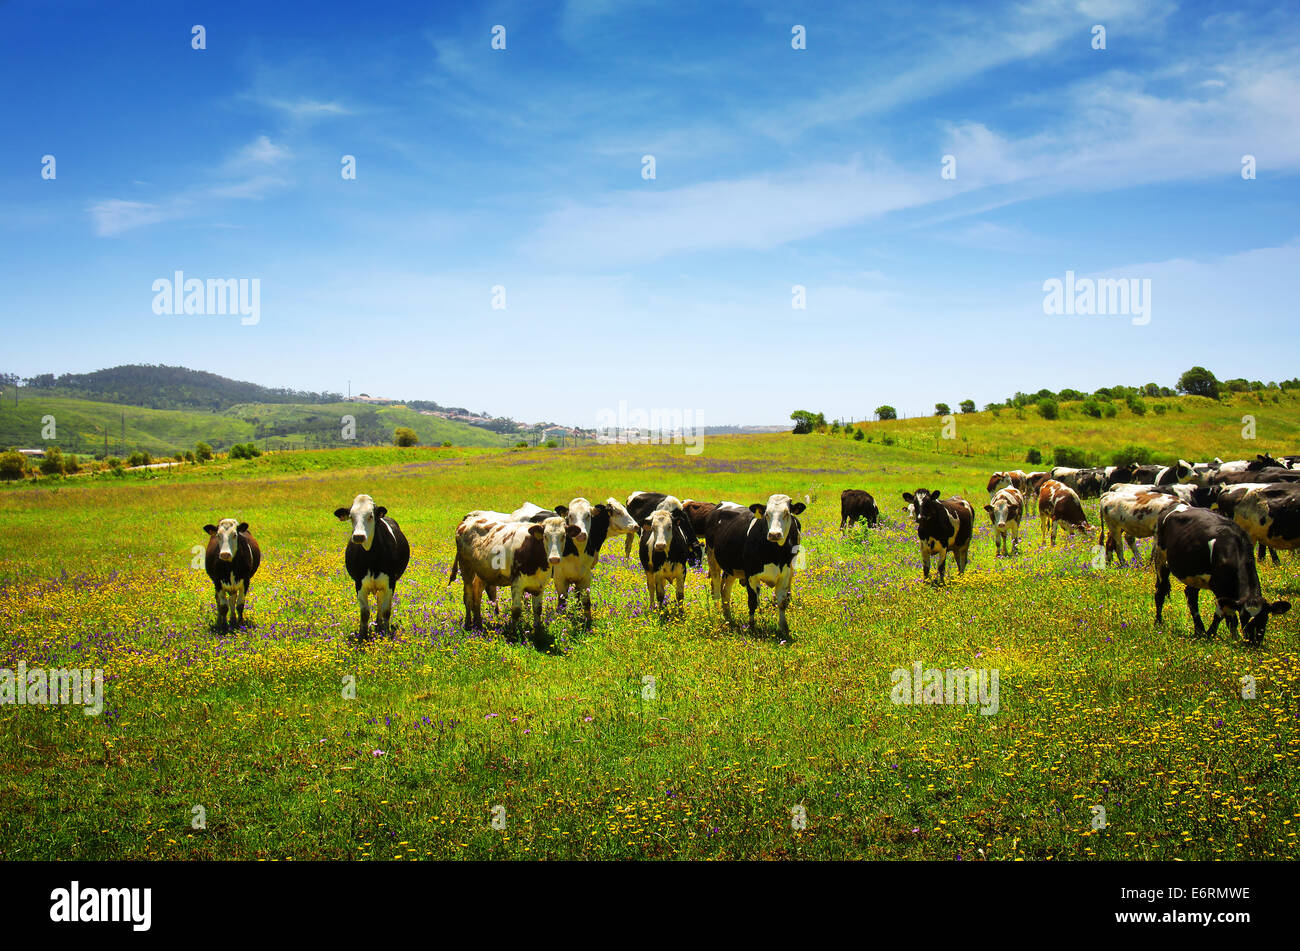 Beautiful rural landscape with vast green field and a herd of cows pasturing Stock Photo